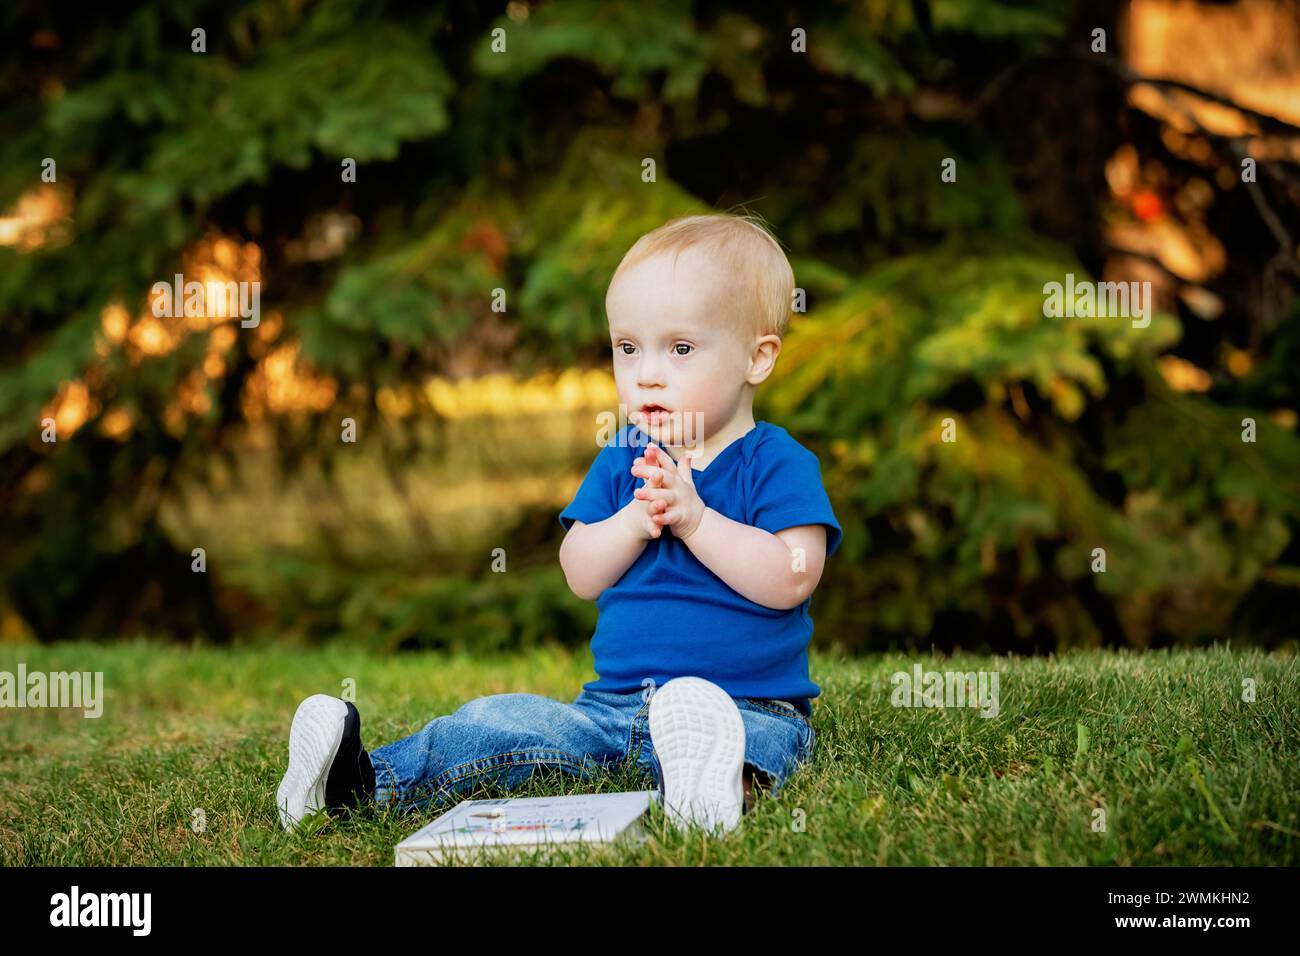 Baby boy with Down syndrome sitting on grass in a city park with a book and using sign language, during a warm fall afternoon; Leduc, Alberta, Canada Stock Photo